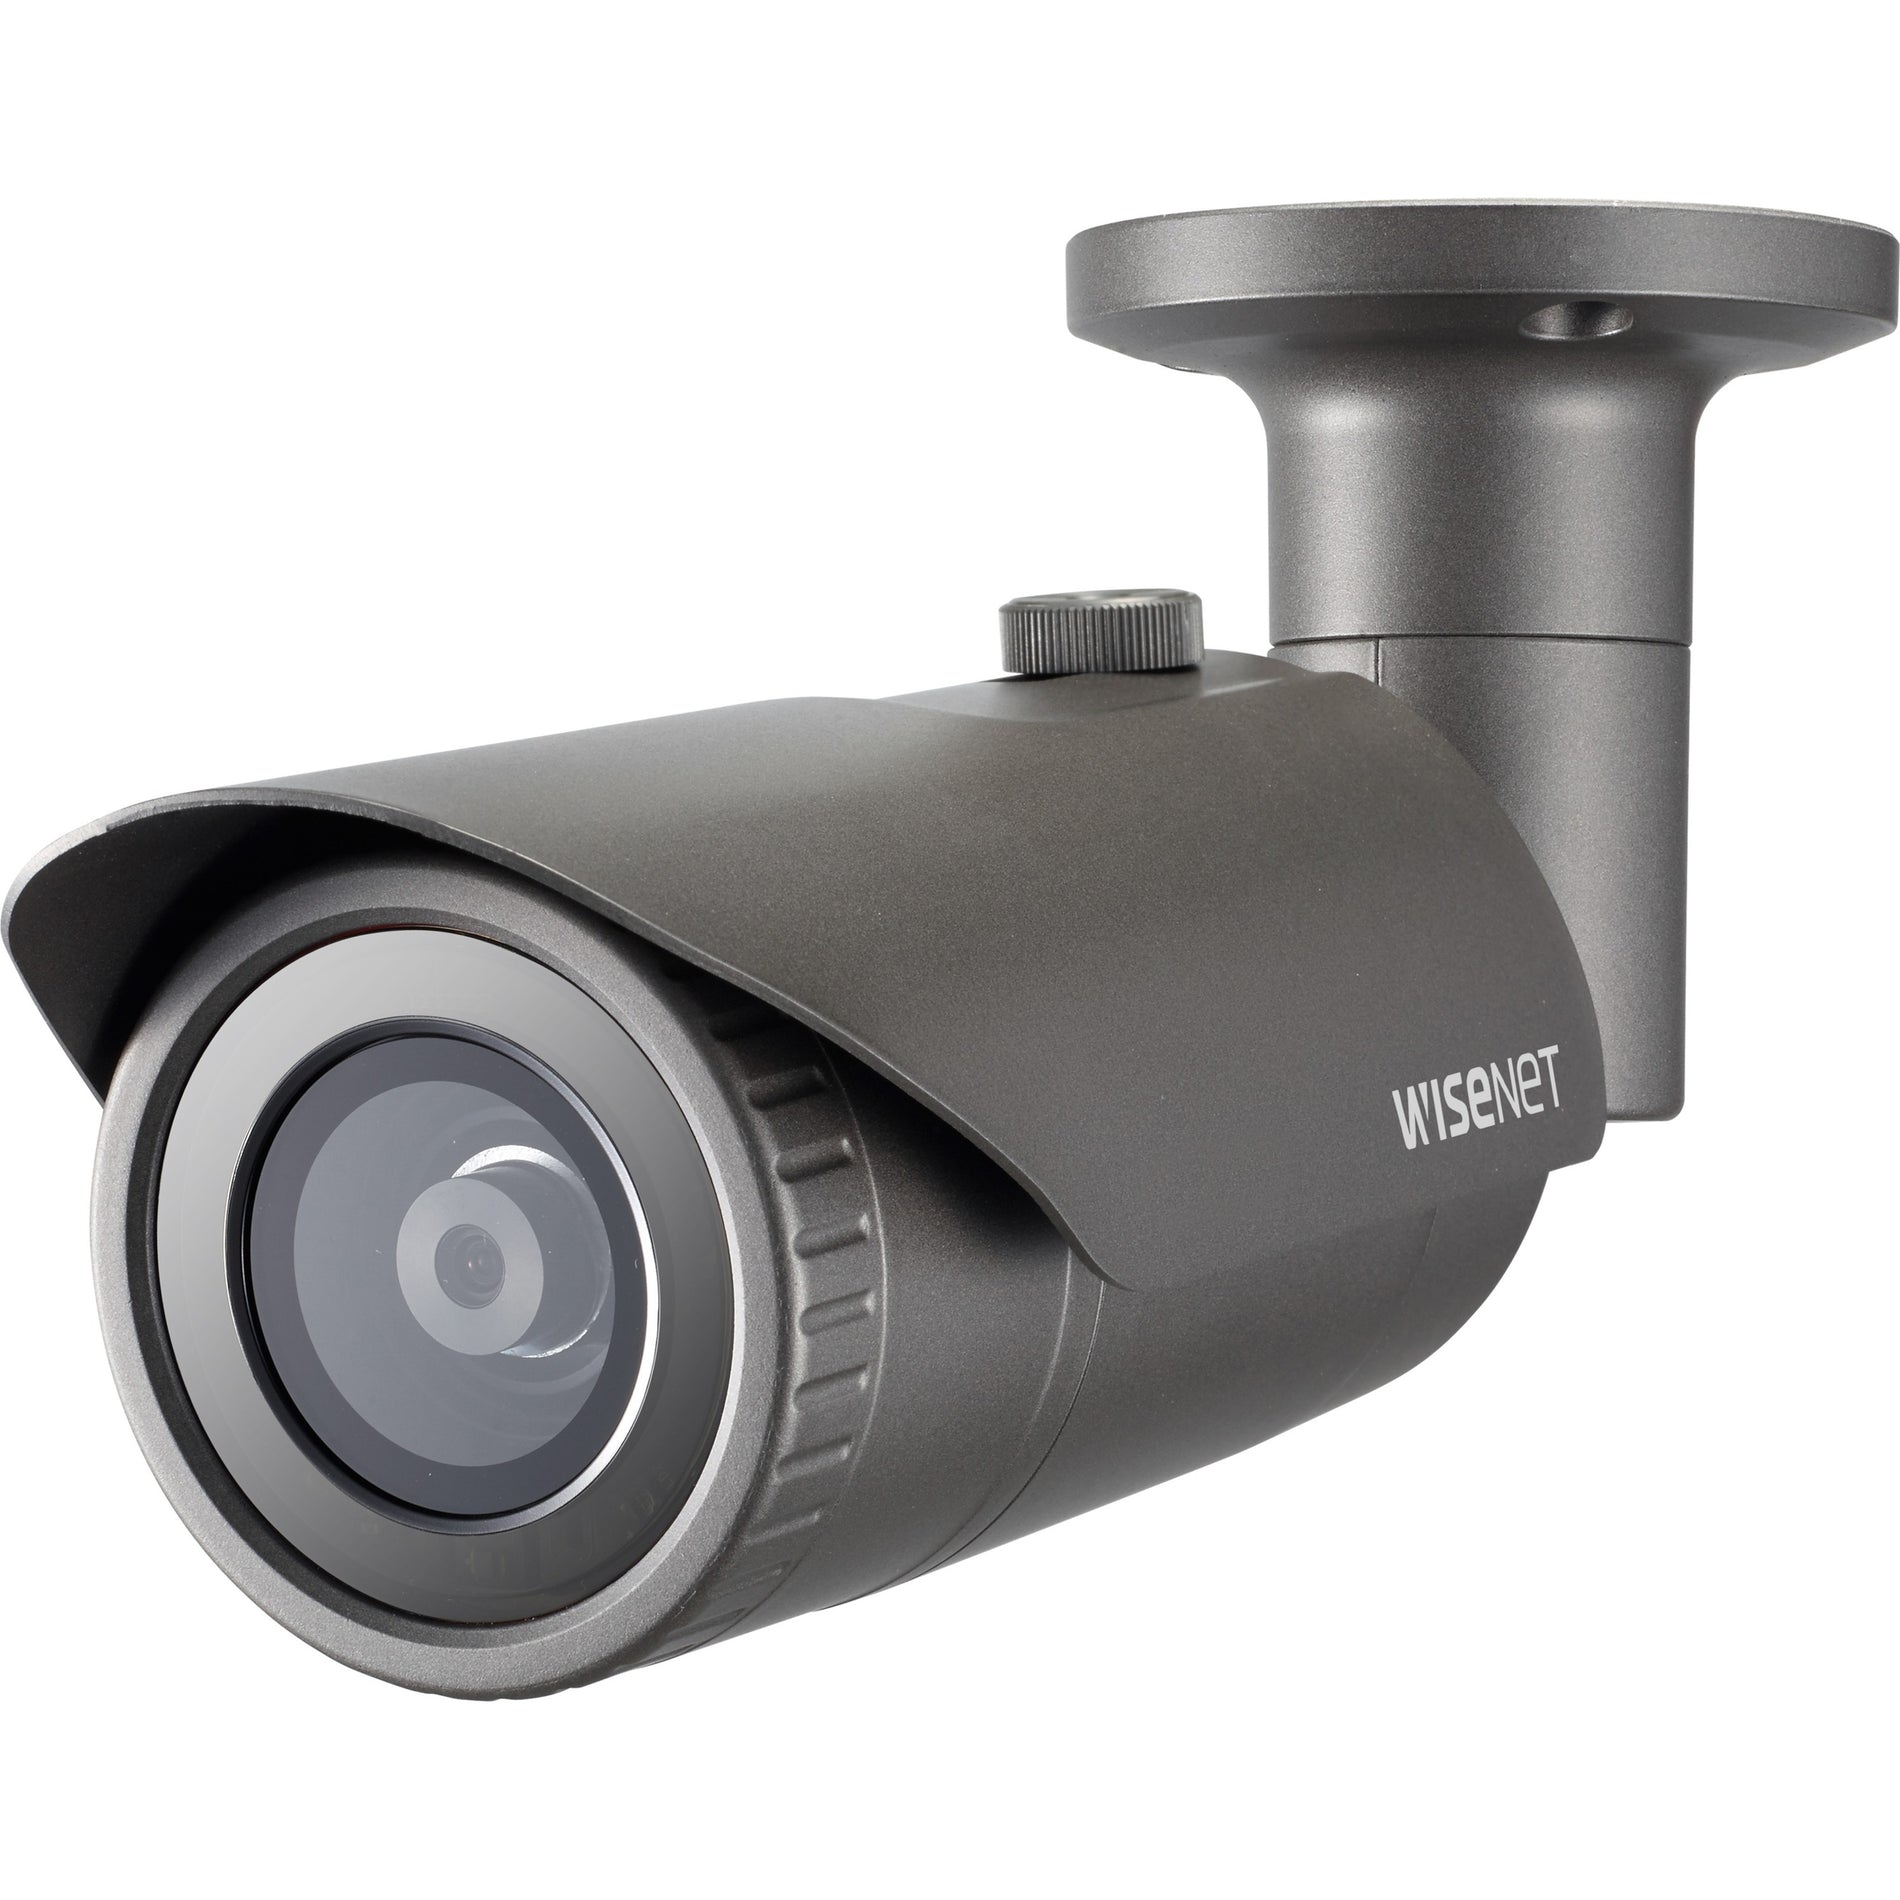 Wisenet Q QNO-8010R 5 MP Network IR Bullet Camera with 2.8mm Lens, Outdoor Vandal Proof, Triple Codec, 120dB WDR